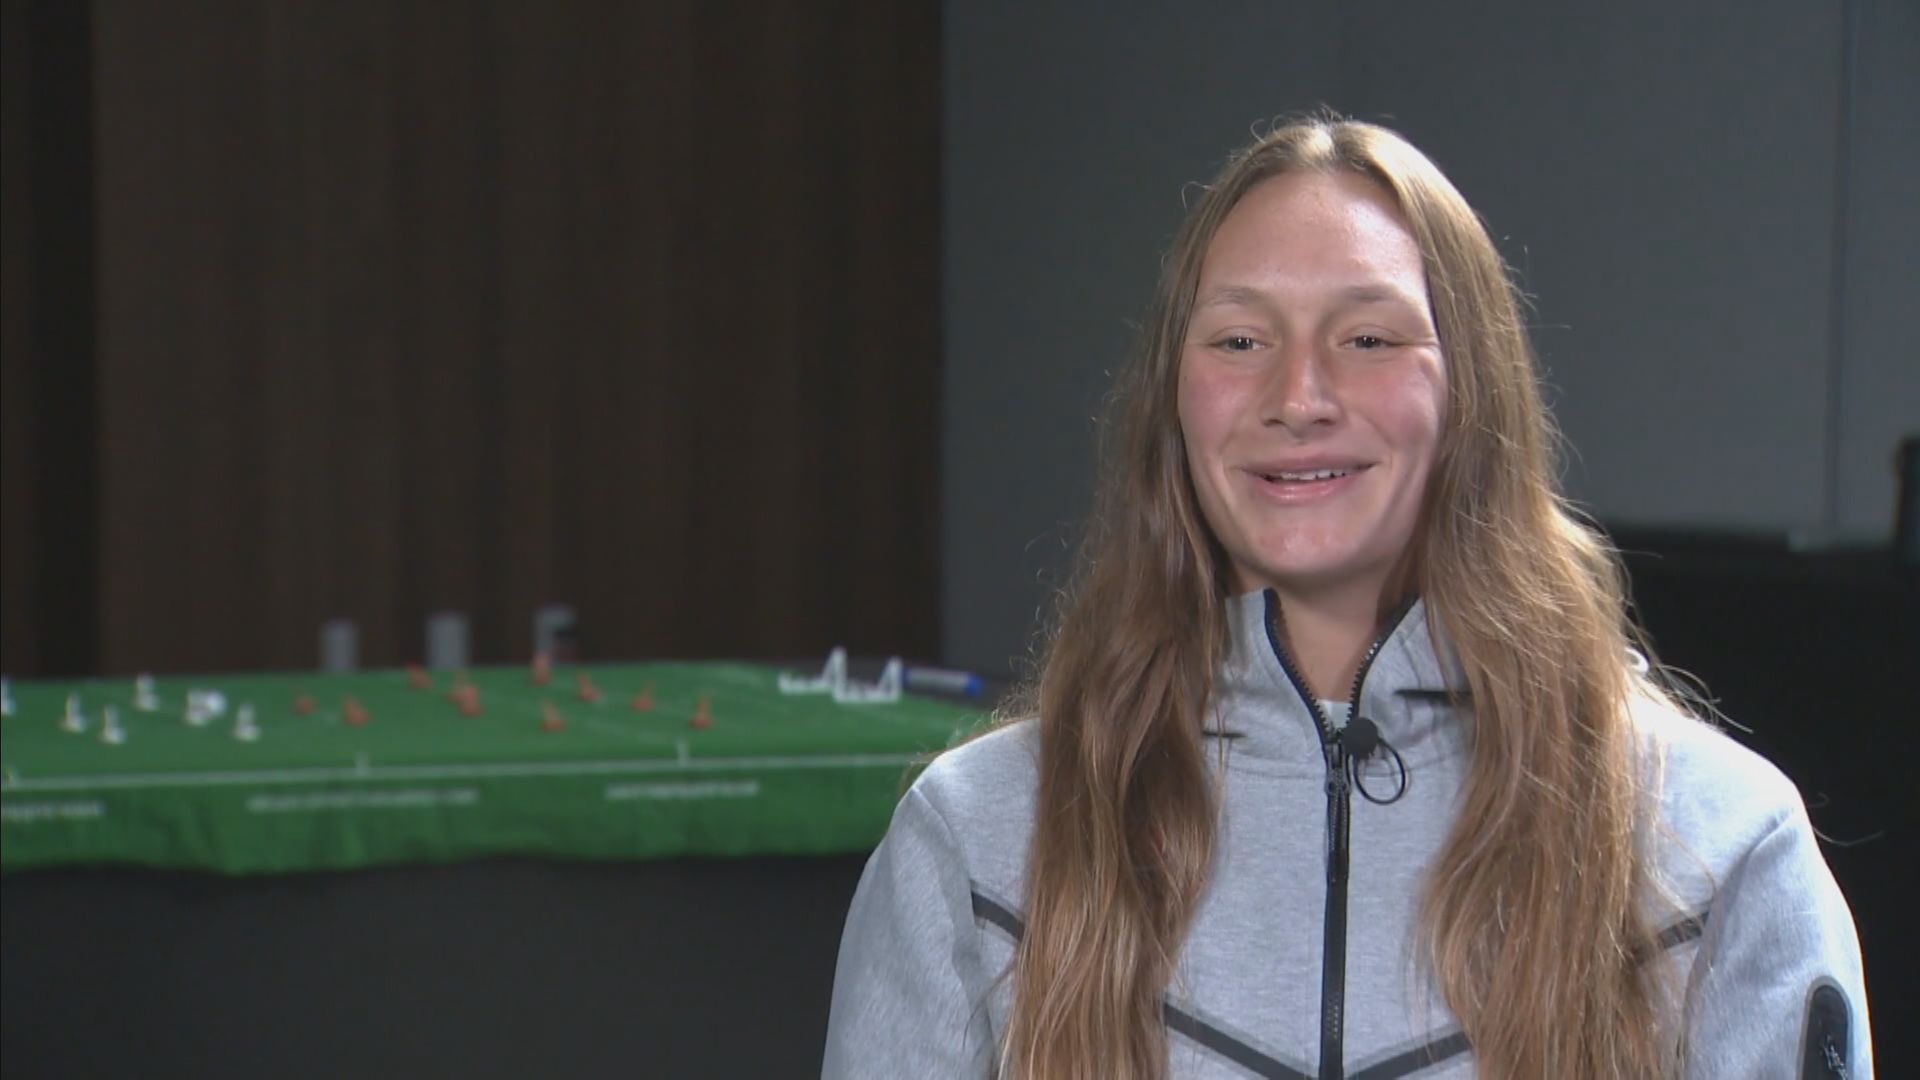 Quebec keeper on ‘huge honour’ of being apart of Canada’s national soccer team